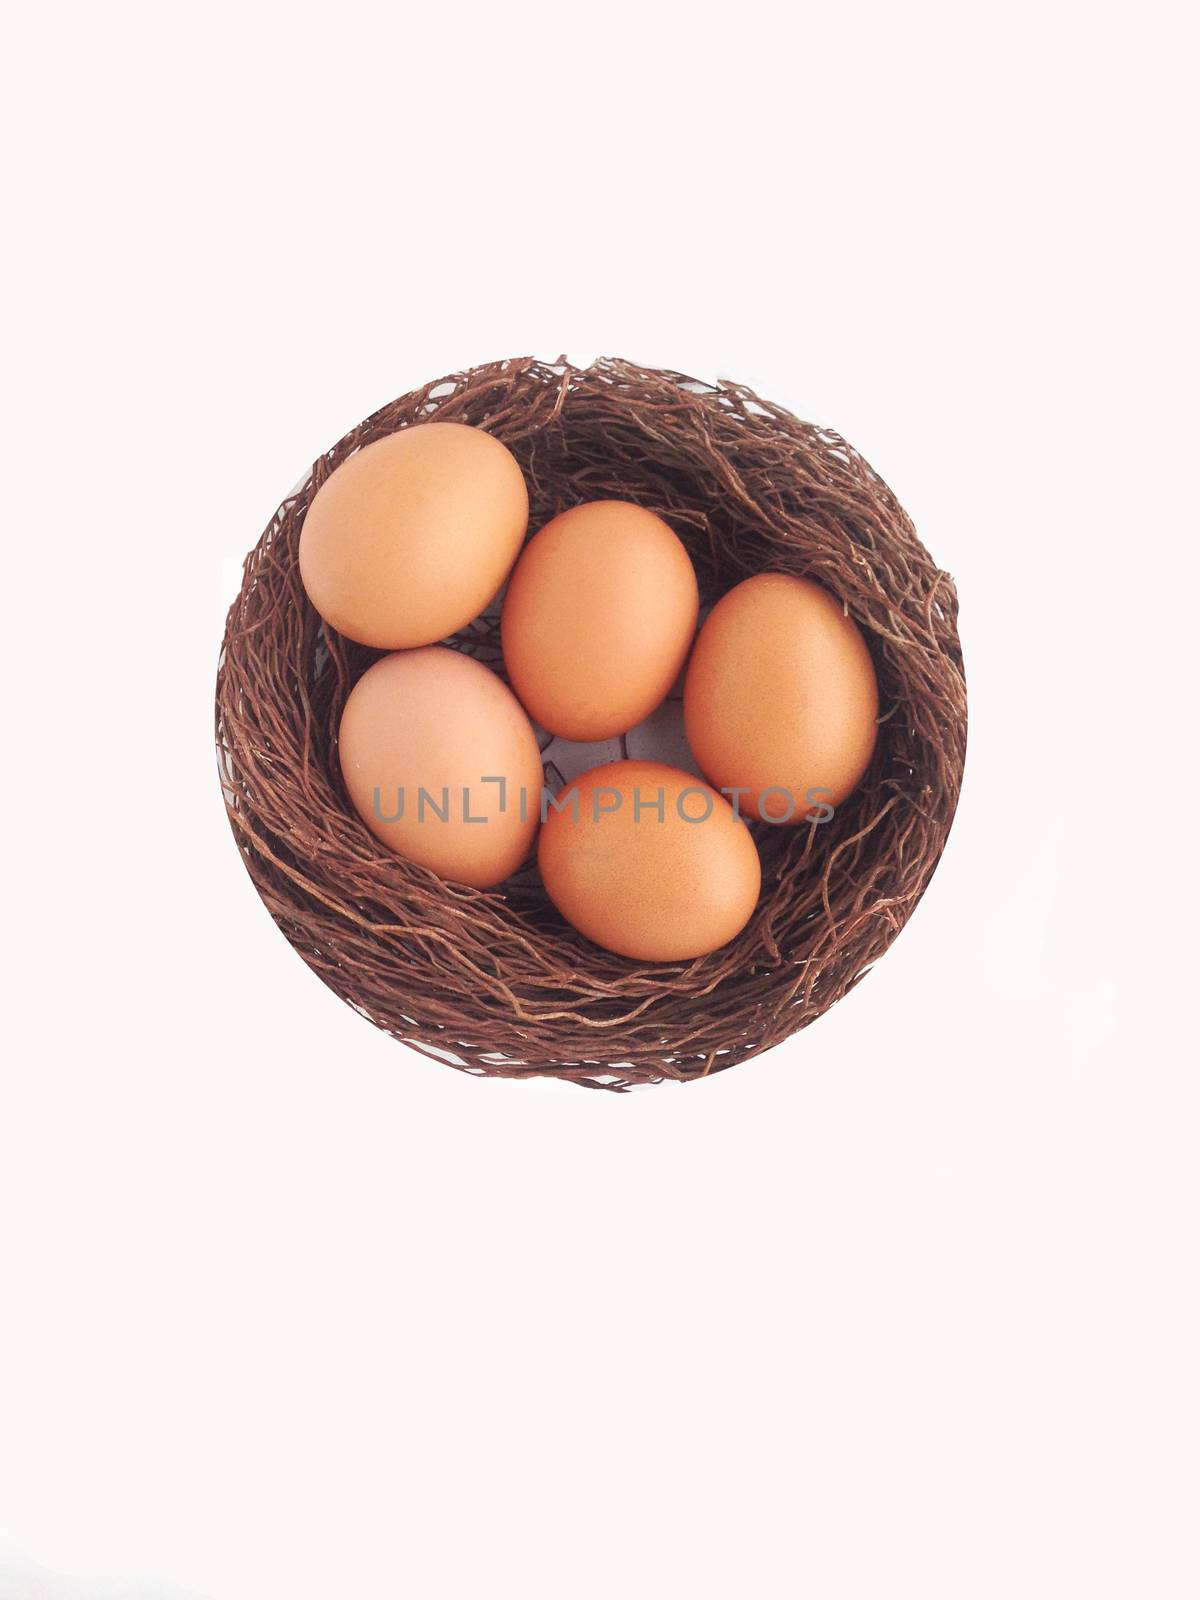 chicken egg on nest made from banyan tree air root with white ba by Bowonpat